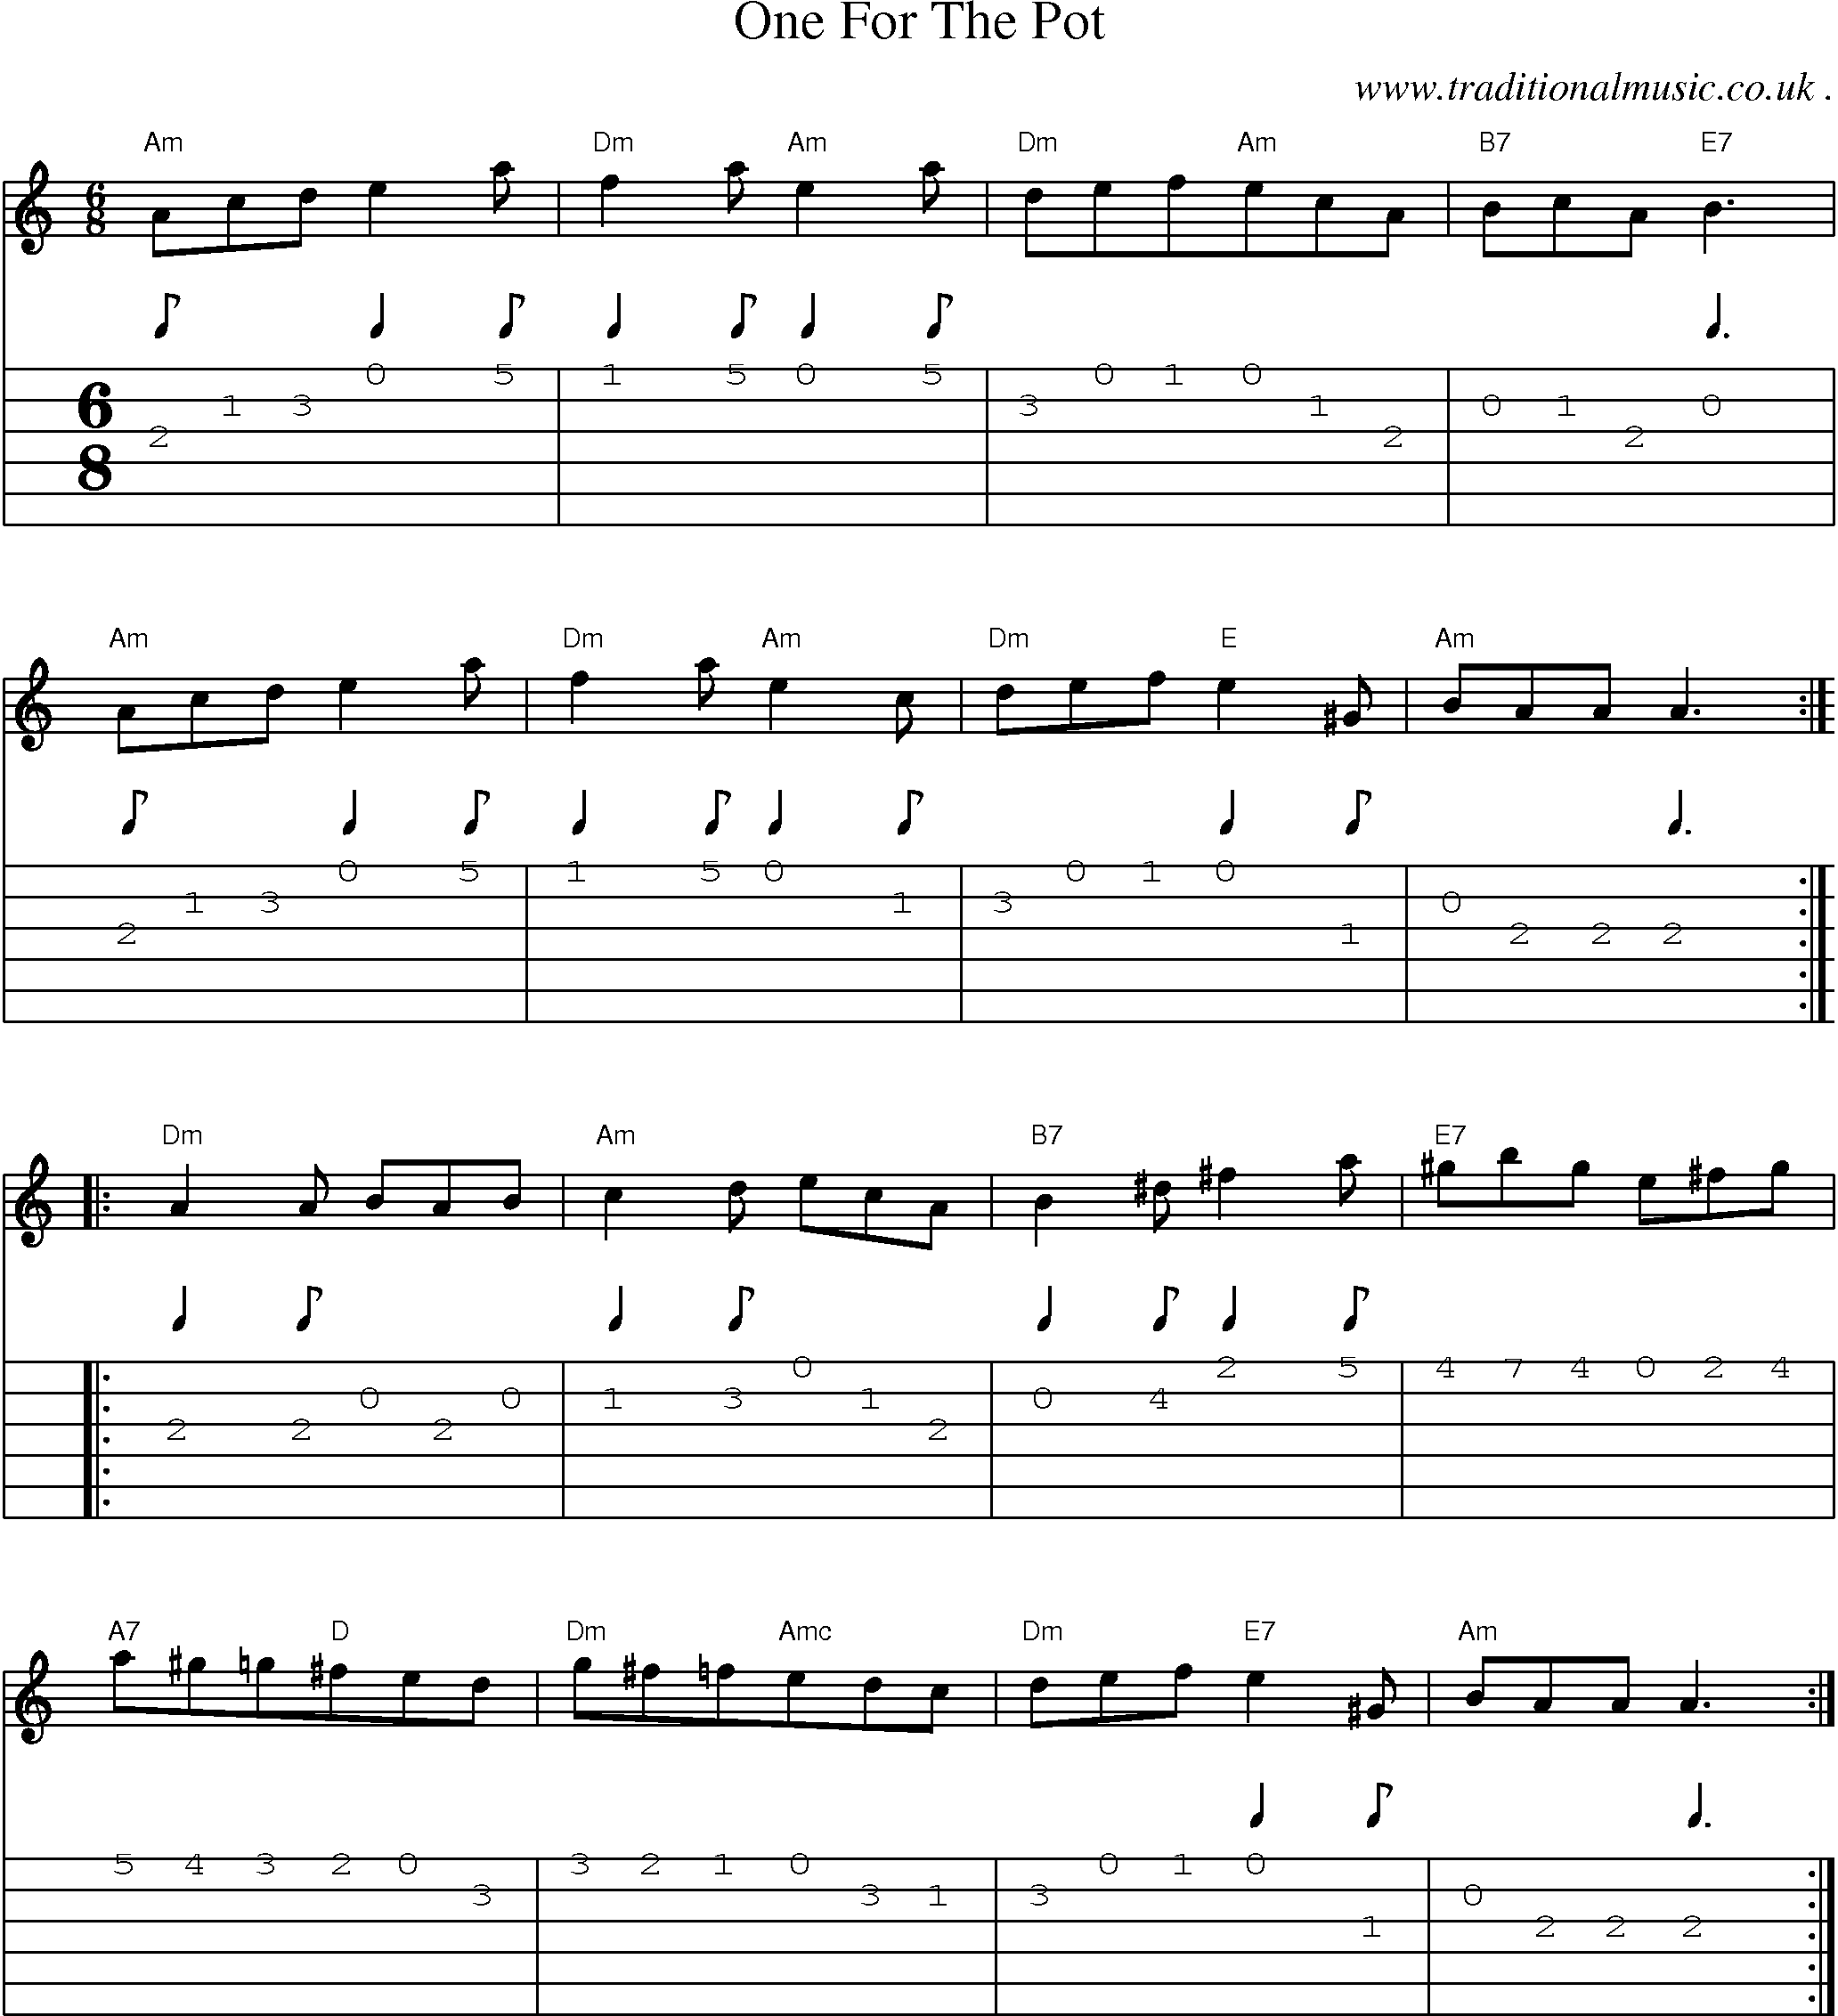 Sheet-Music and Guitar Tabs for One For The Pot